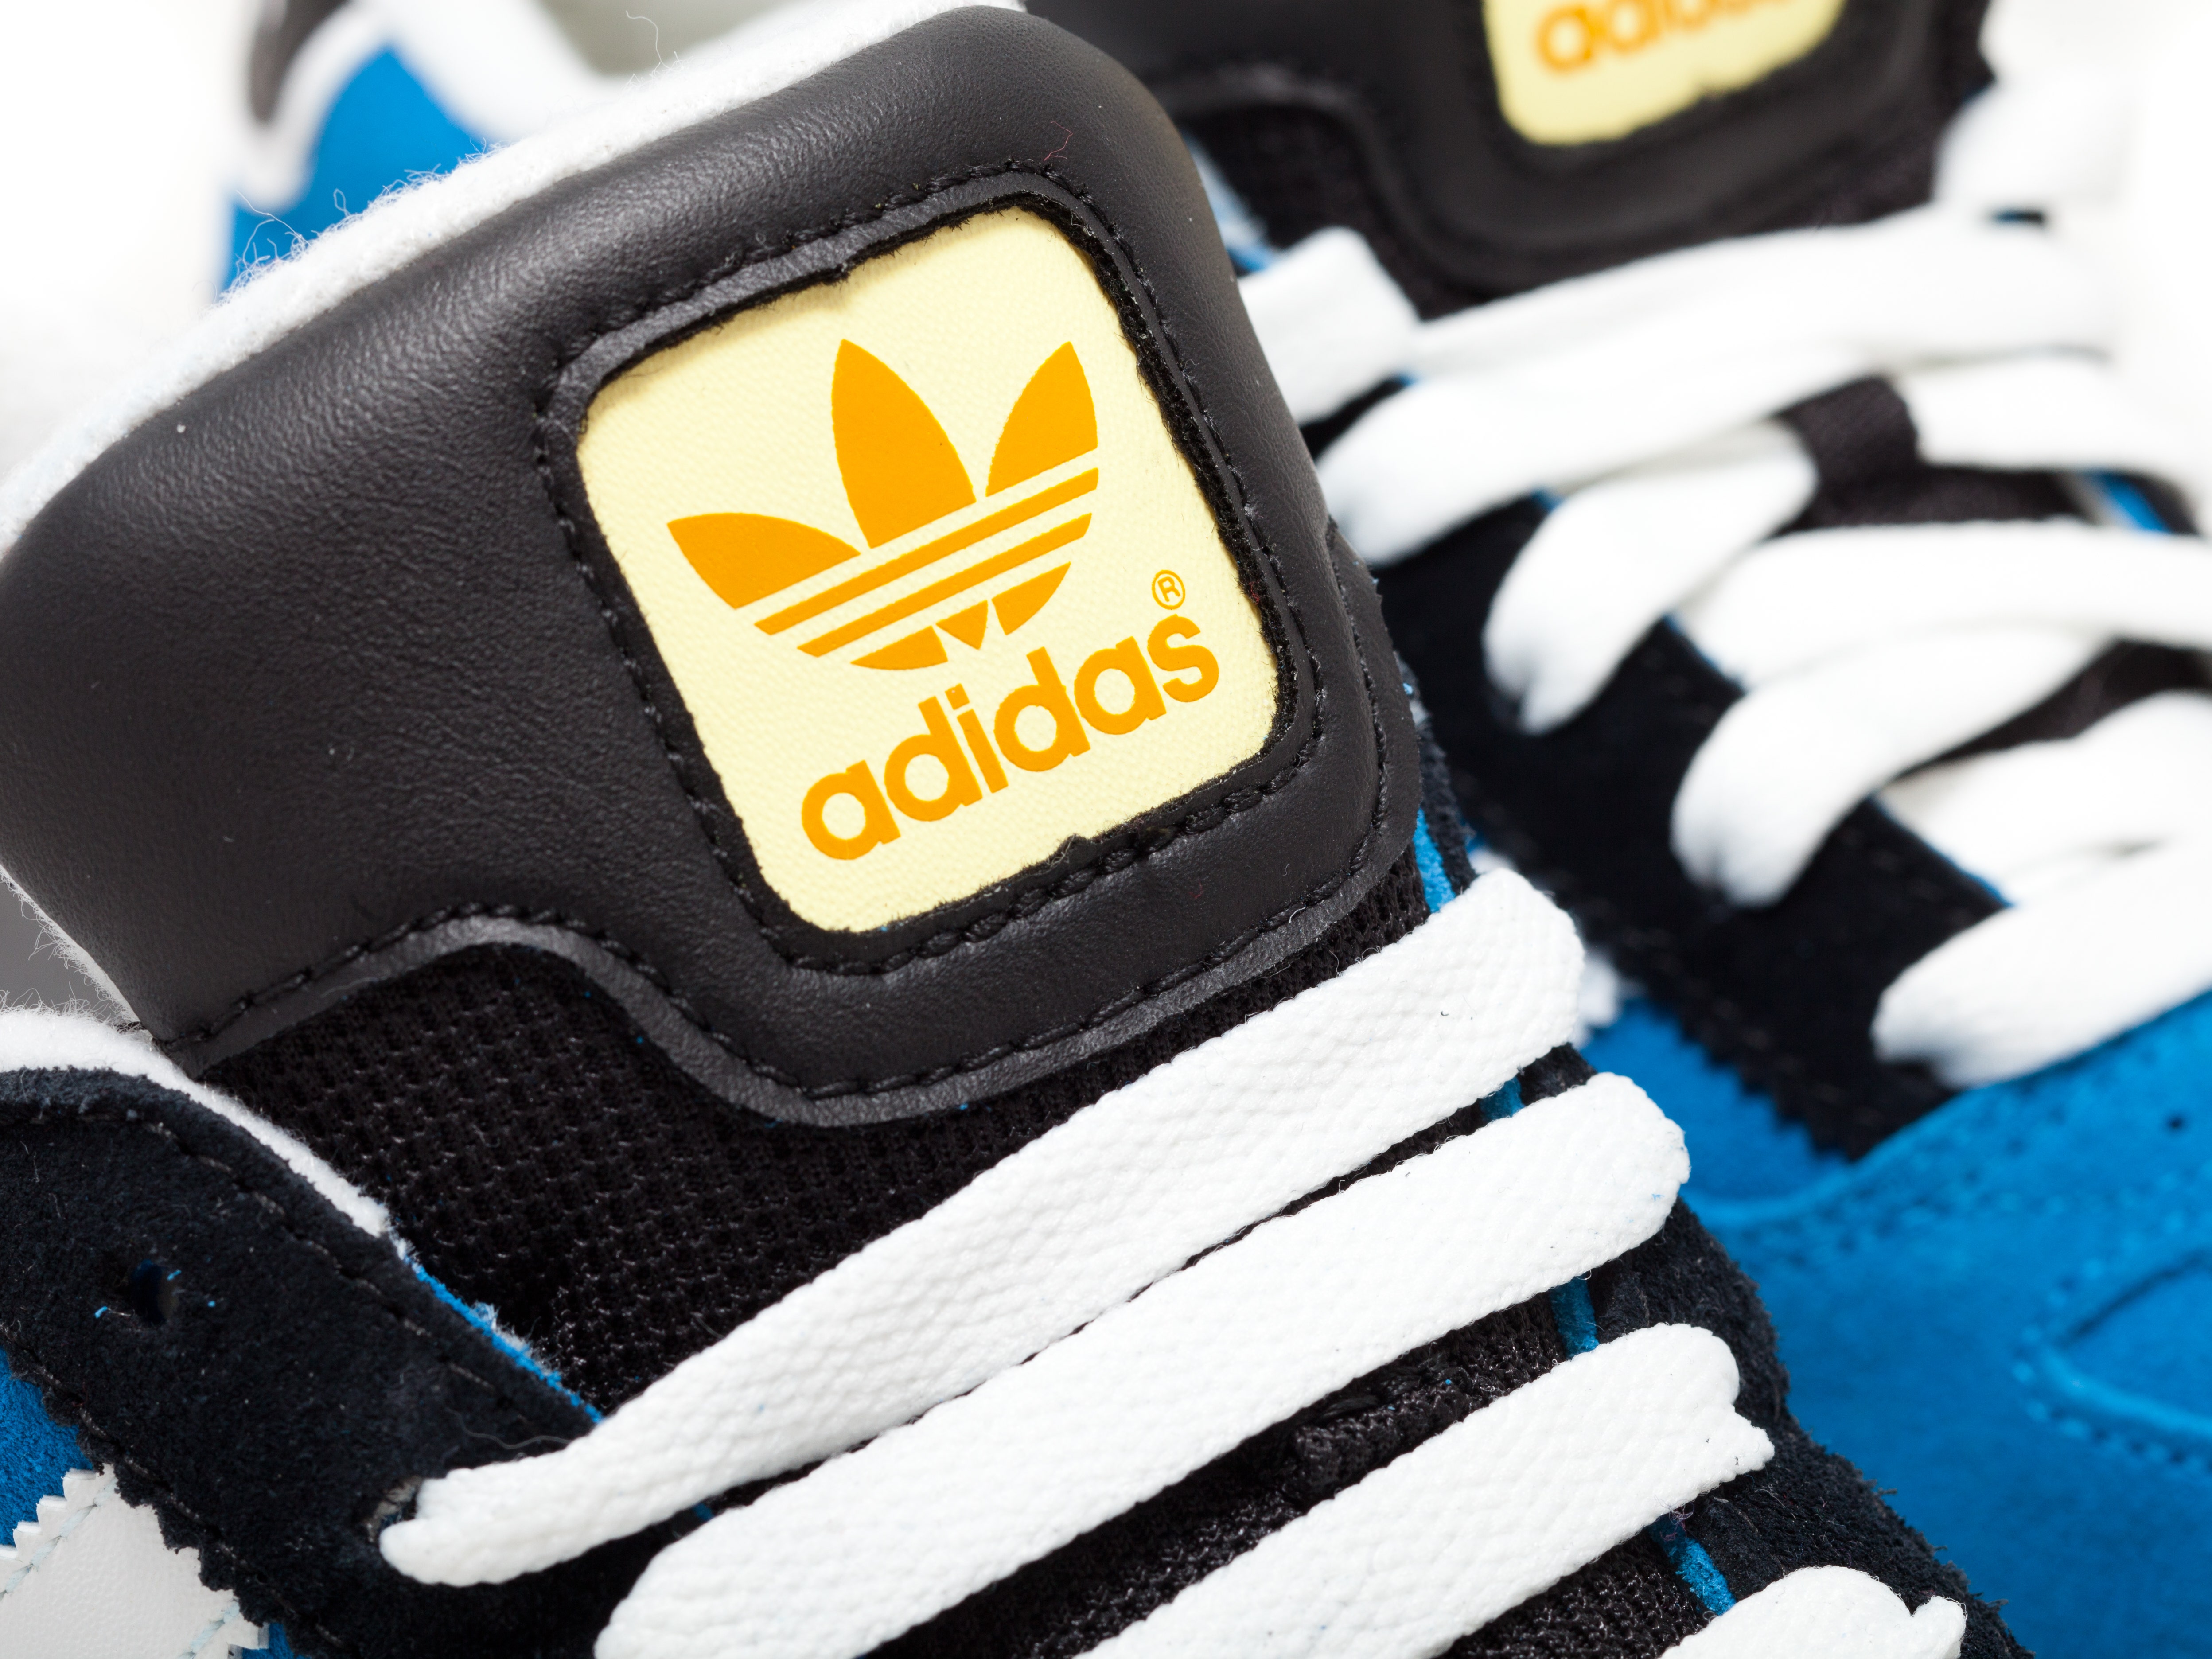 heuvel leven Wordt erger Adidas: Why I Love The Shoes And The Stock (OTCMKTS:ADDYY) | Seeking Alpha